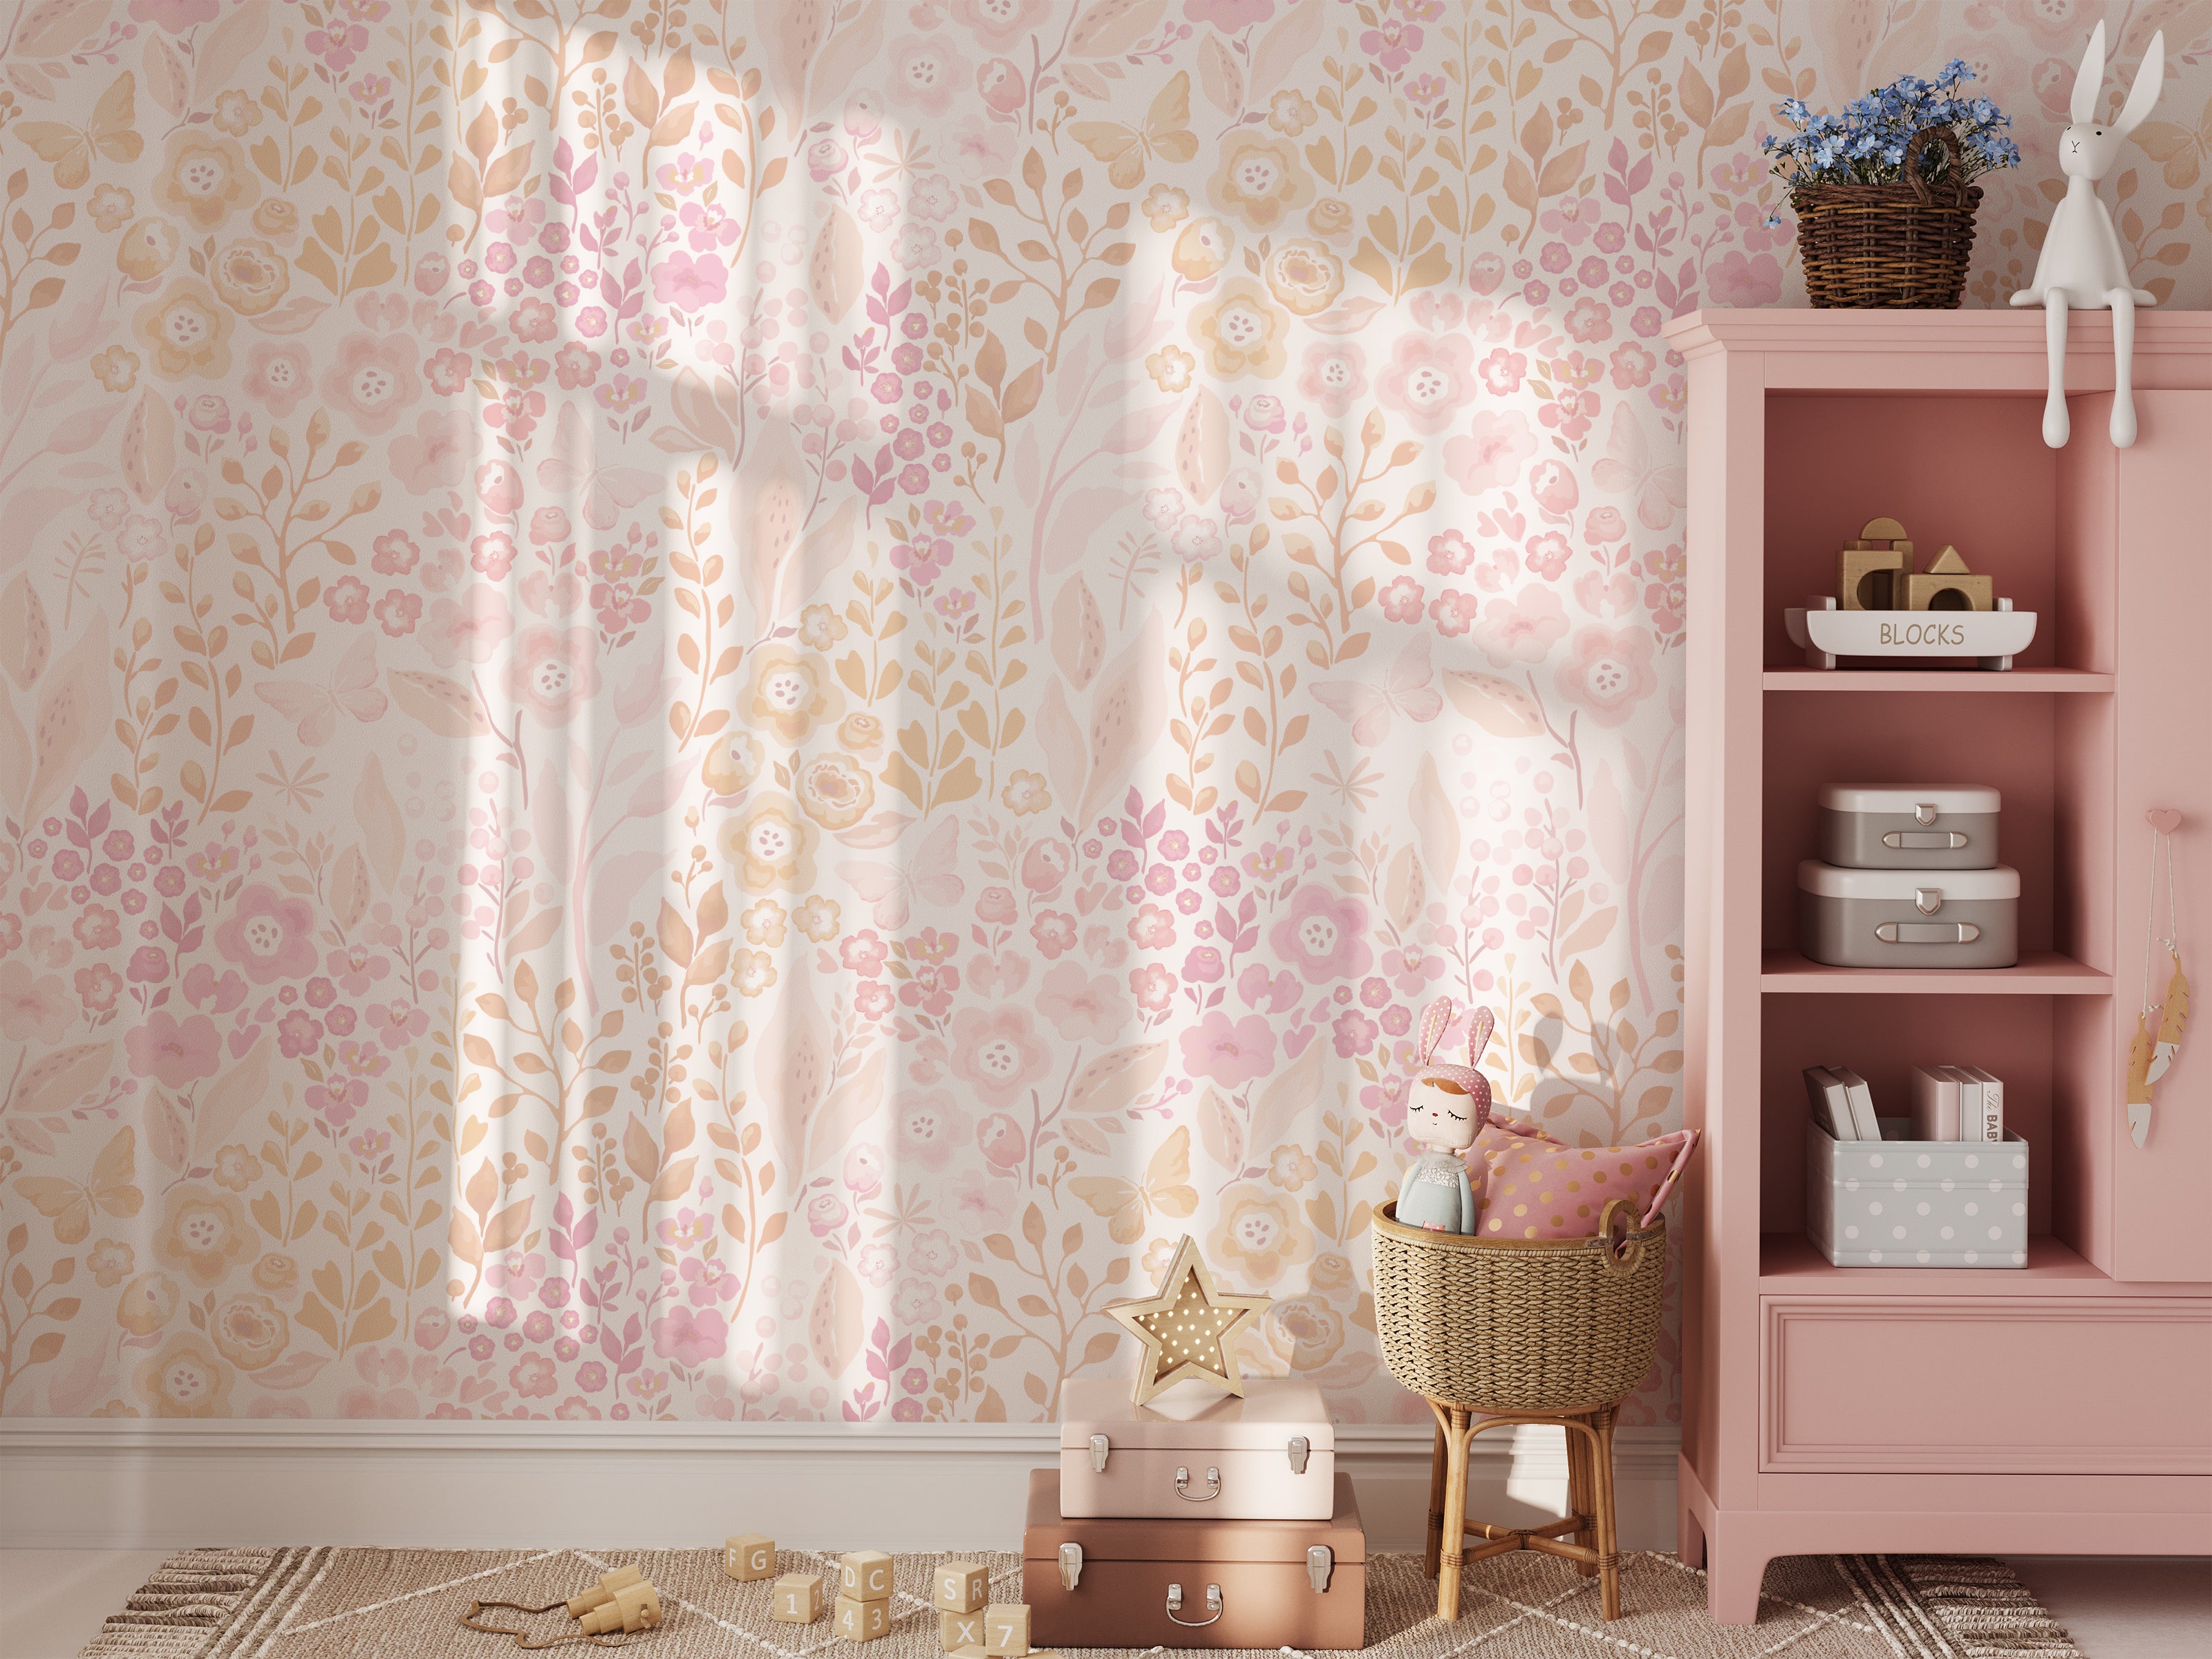 A cozy nursery corner graced with the 'Pretty Petals Wallpaper', providing a dreamy and tender setting for a child's room. The soft wallpaper pattern complements the pink shelving, plush toys, and star-shaped decor, creating a whimsical space for little ones.